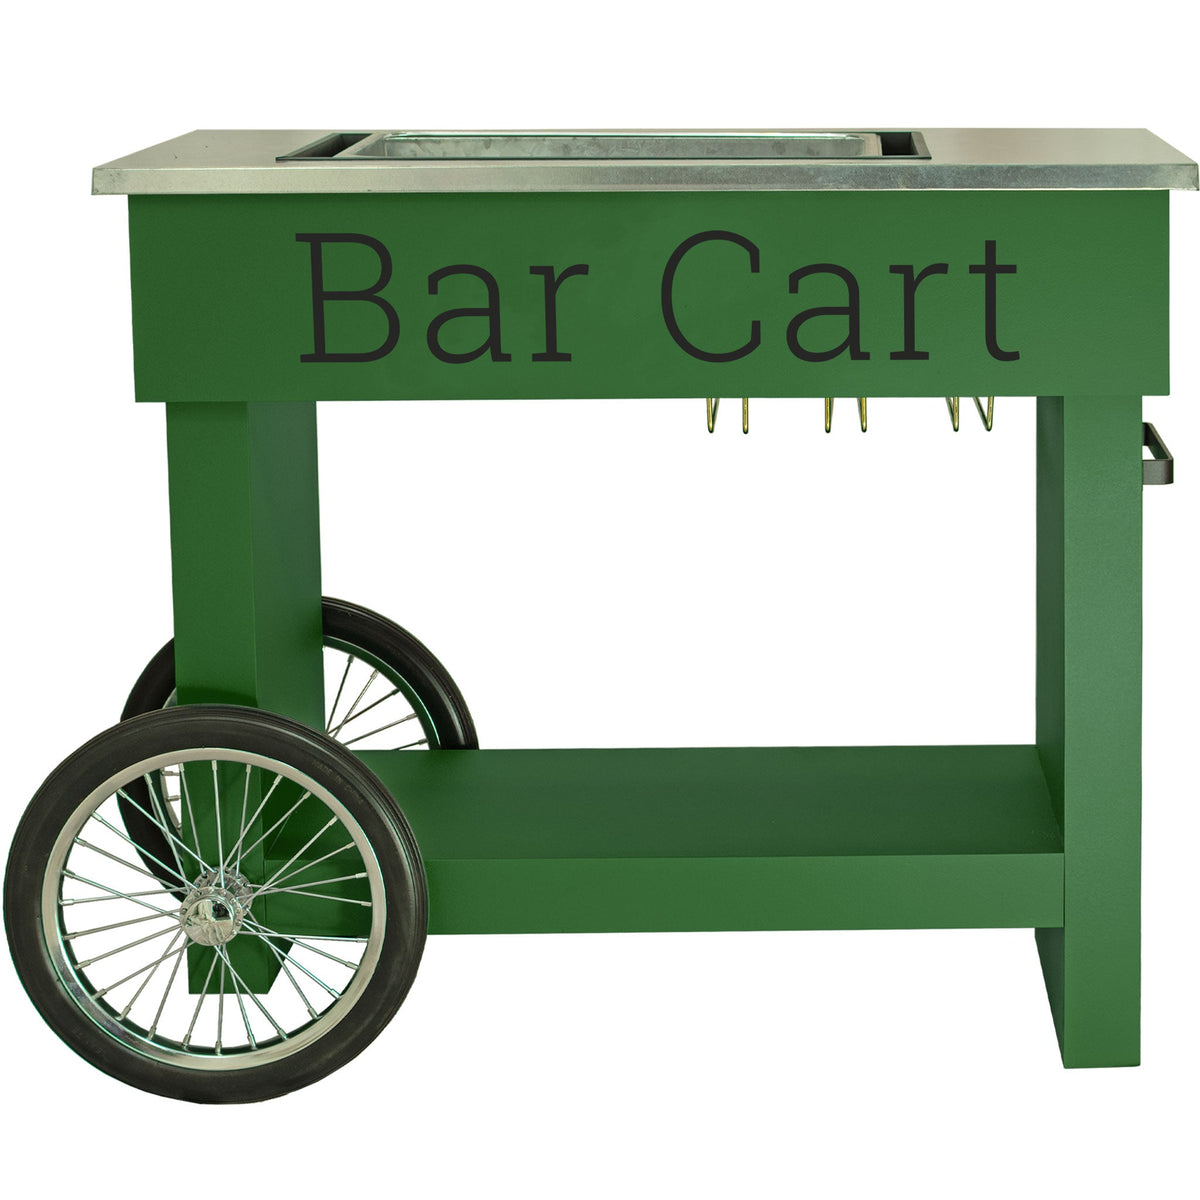 Lee Display's Champagne and Wine Bar Cart with Wheels in Green Color and a Bar Cart Decal